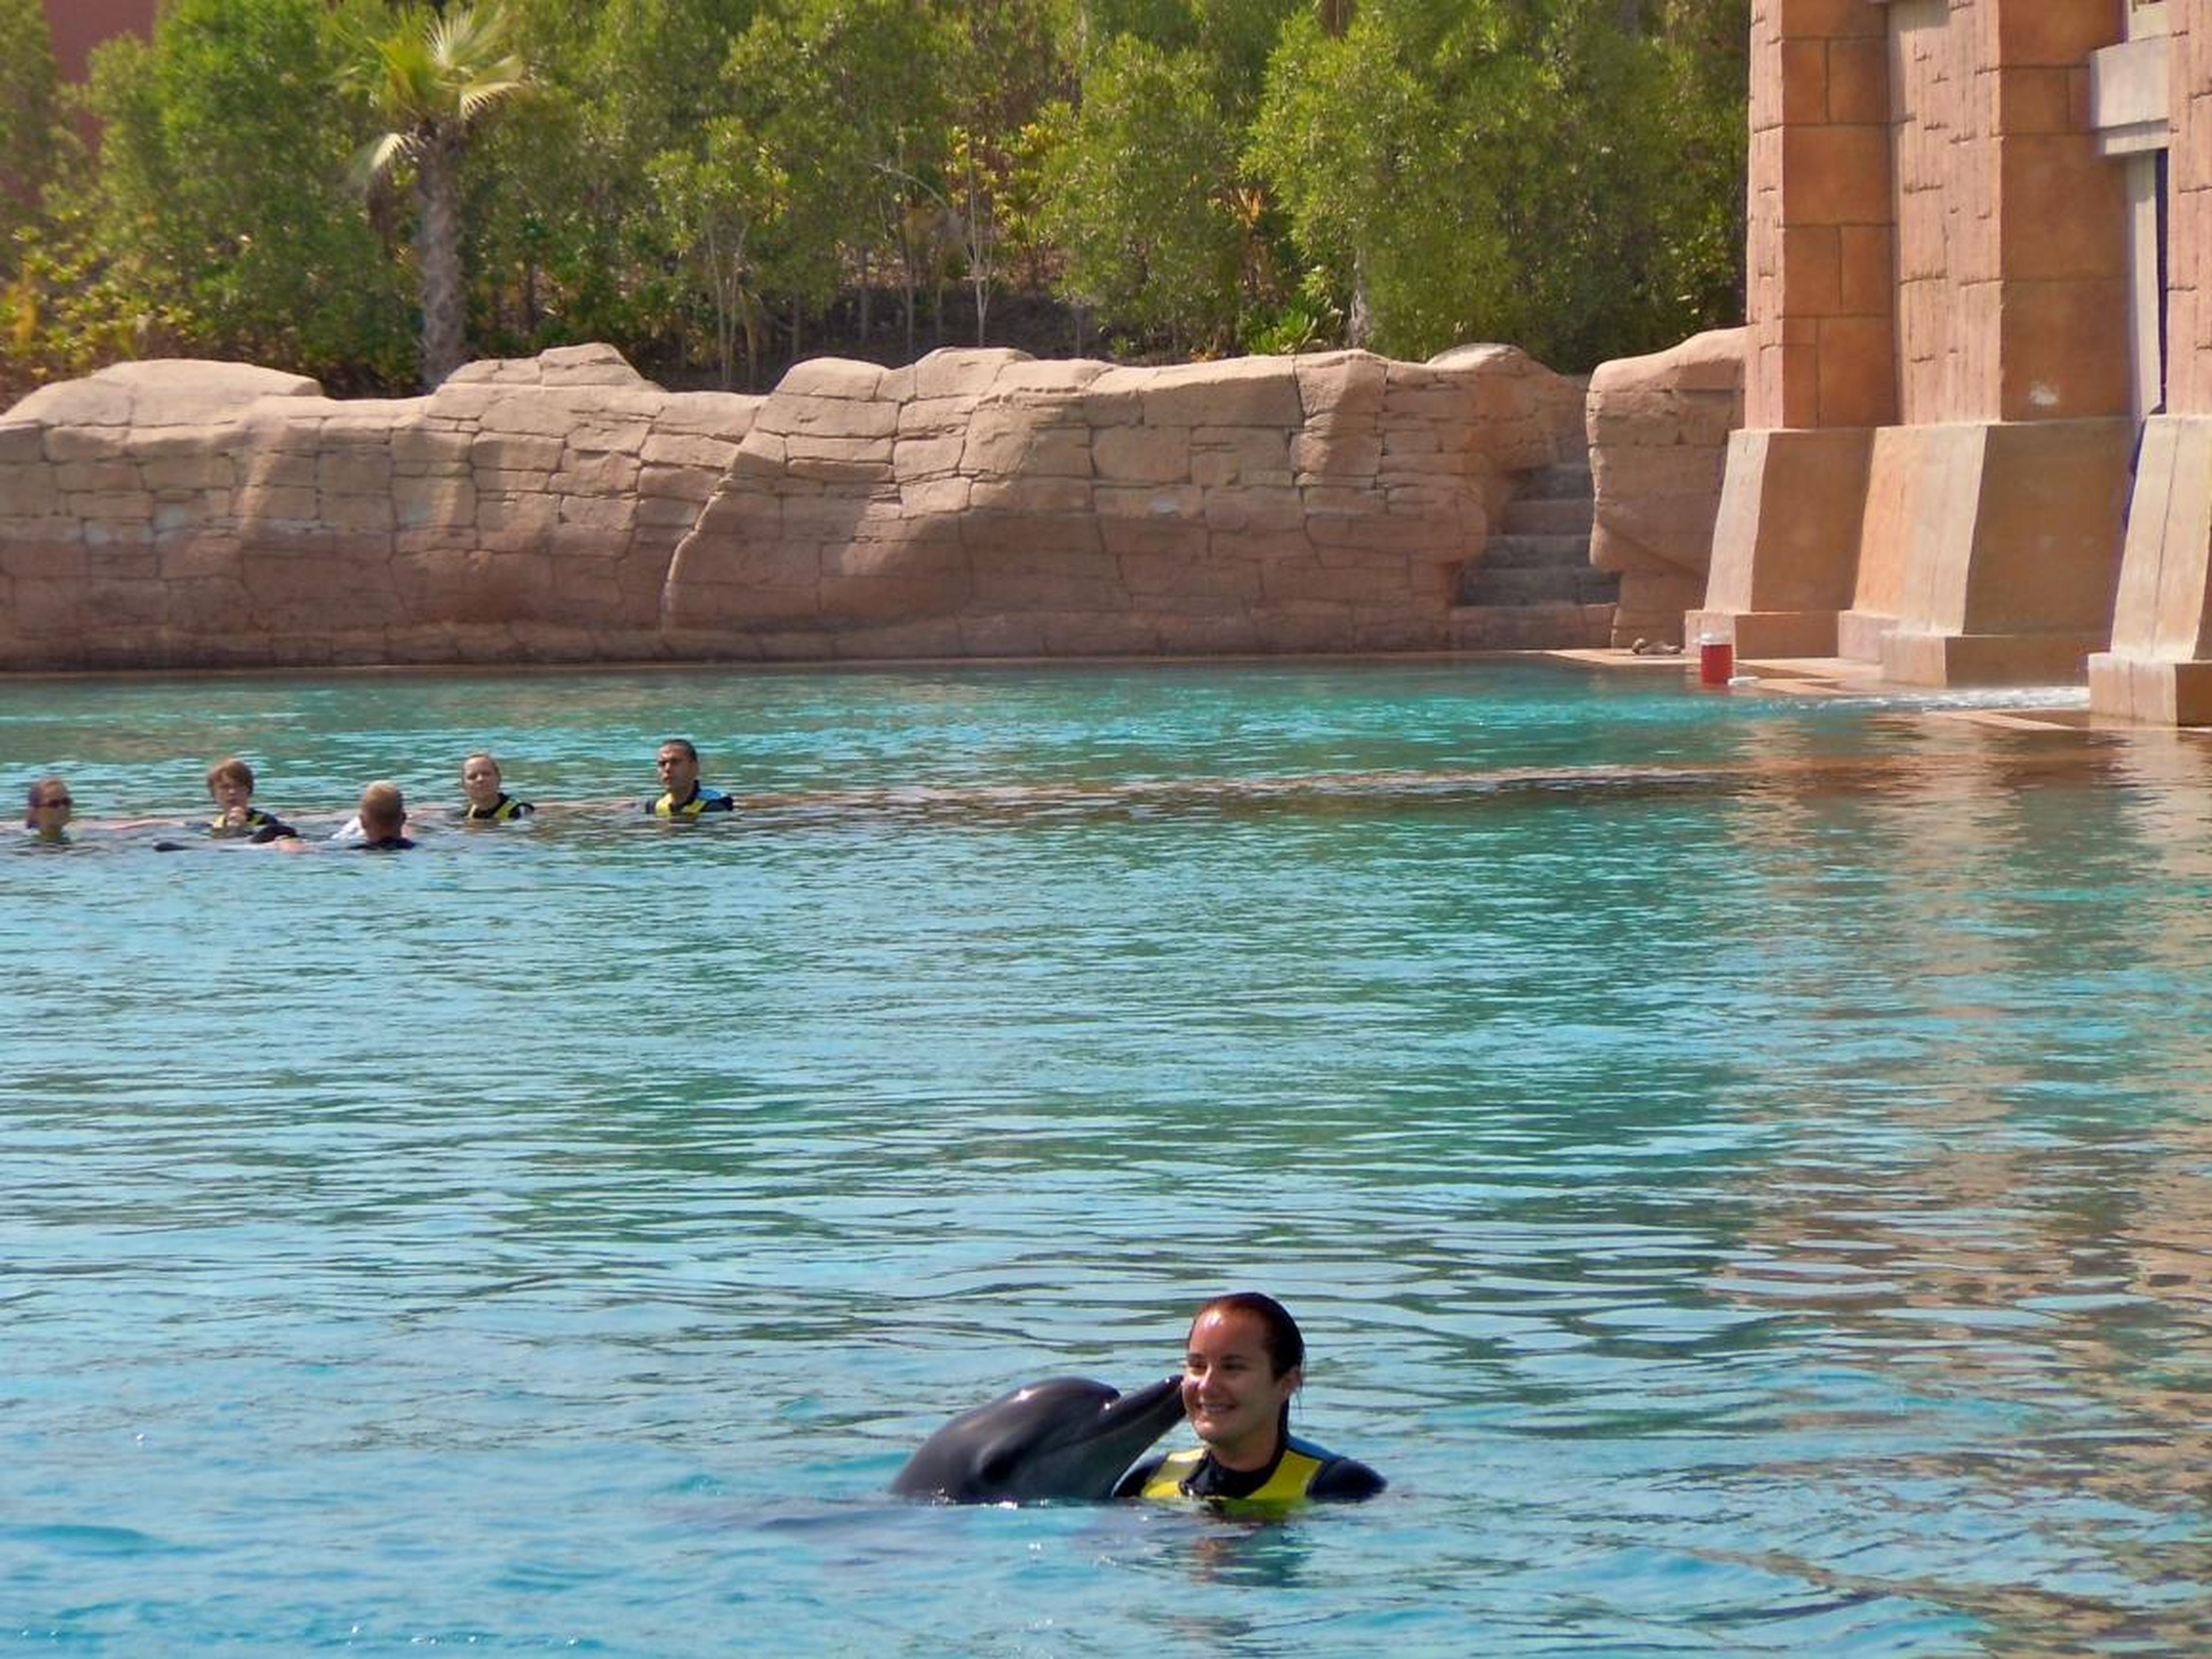 Even if you are prepared to pay, you may be disappointed to find that some activities aren't quite what you expected. Dolphin "rides," for example, are frequently housed in on-site pools.